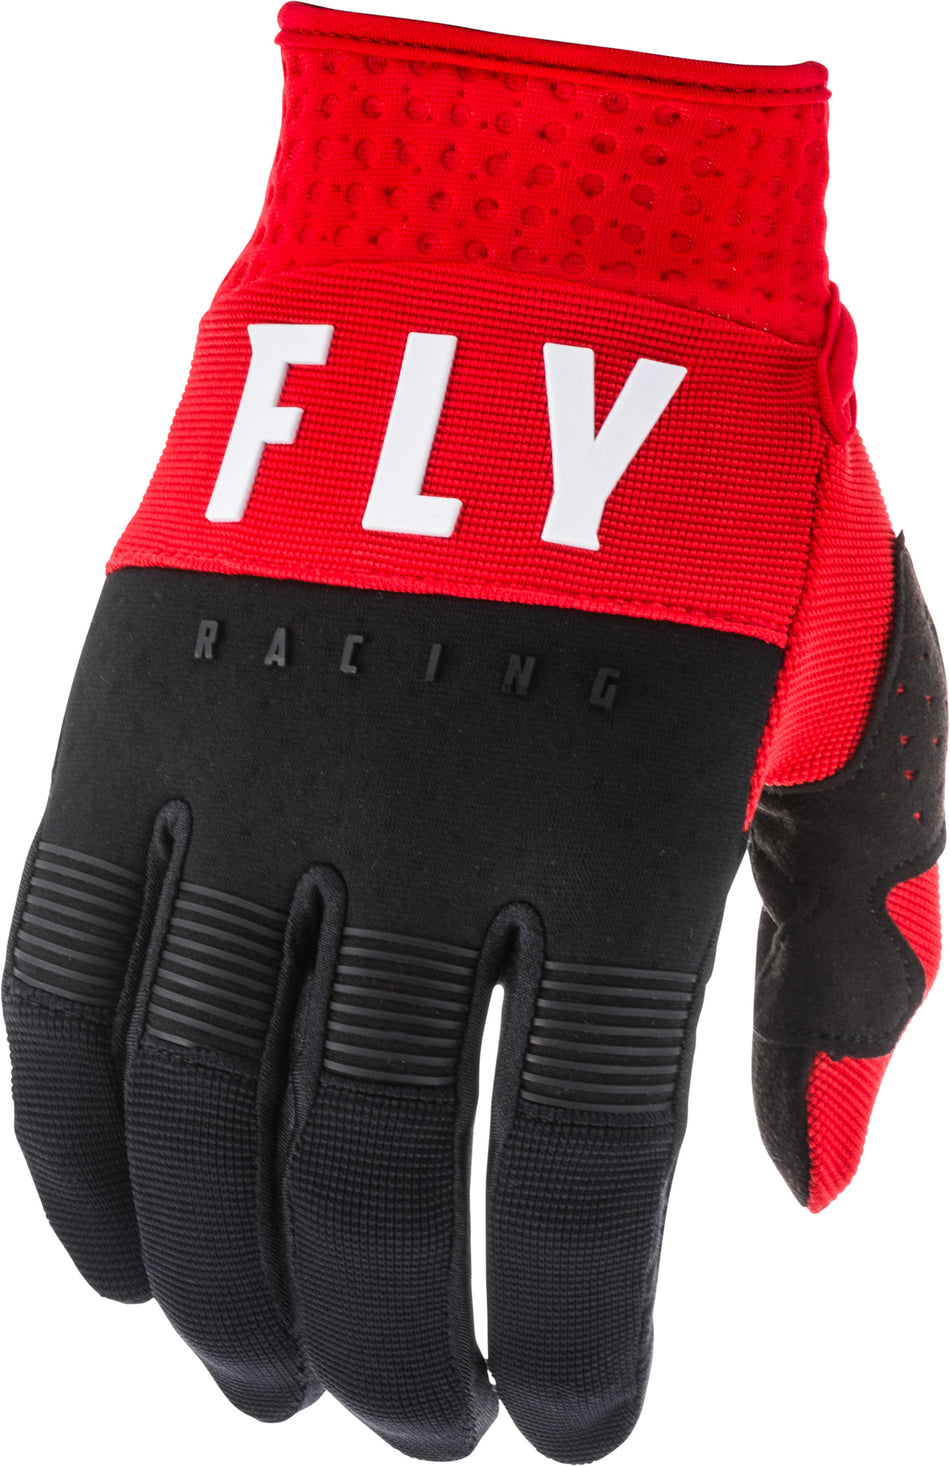 FLY RACING F-16 Gloves Red/Black/White Sz 08 373-91308